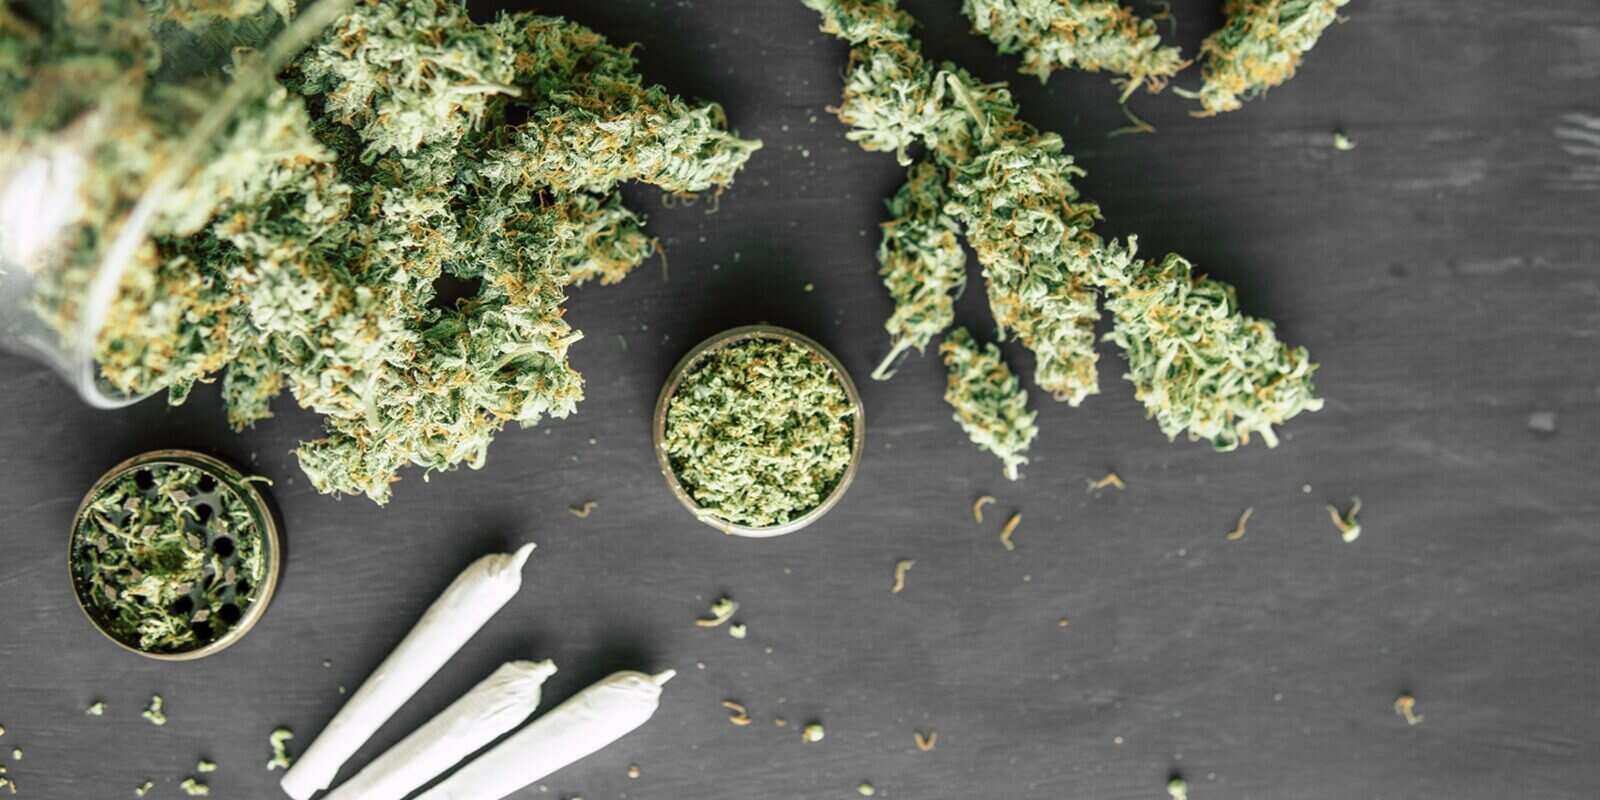 rolled joint with marijuana against the background of fresh weed from Boston dispensary